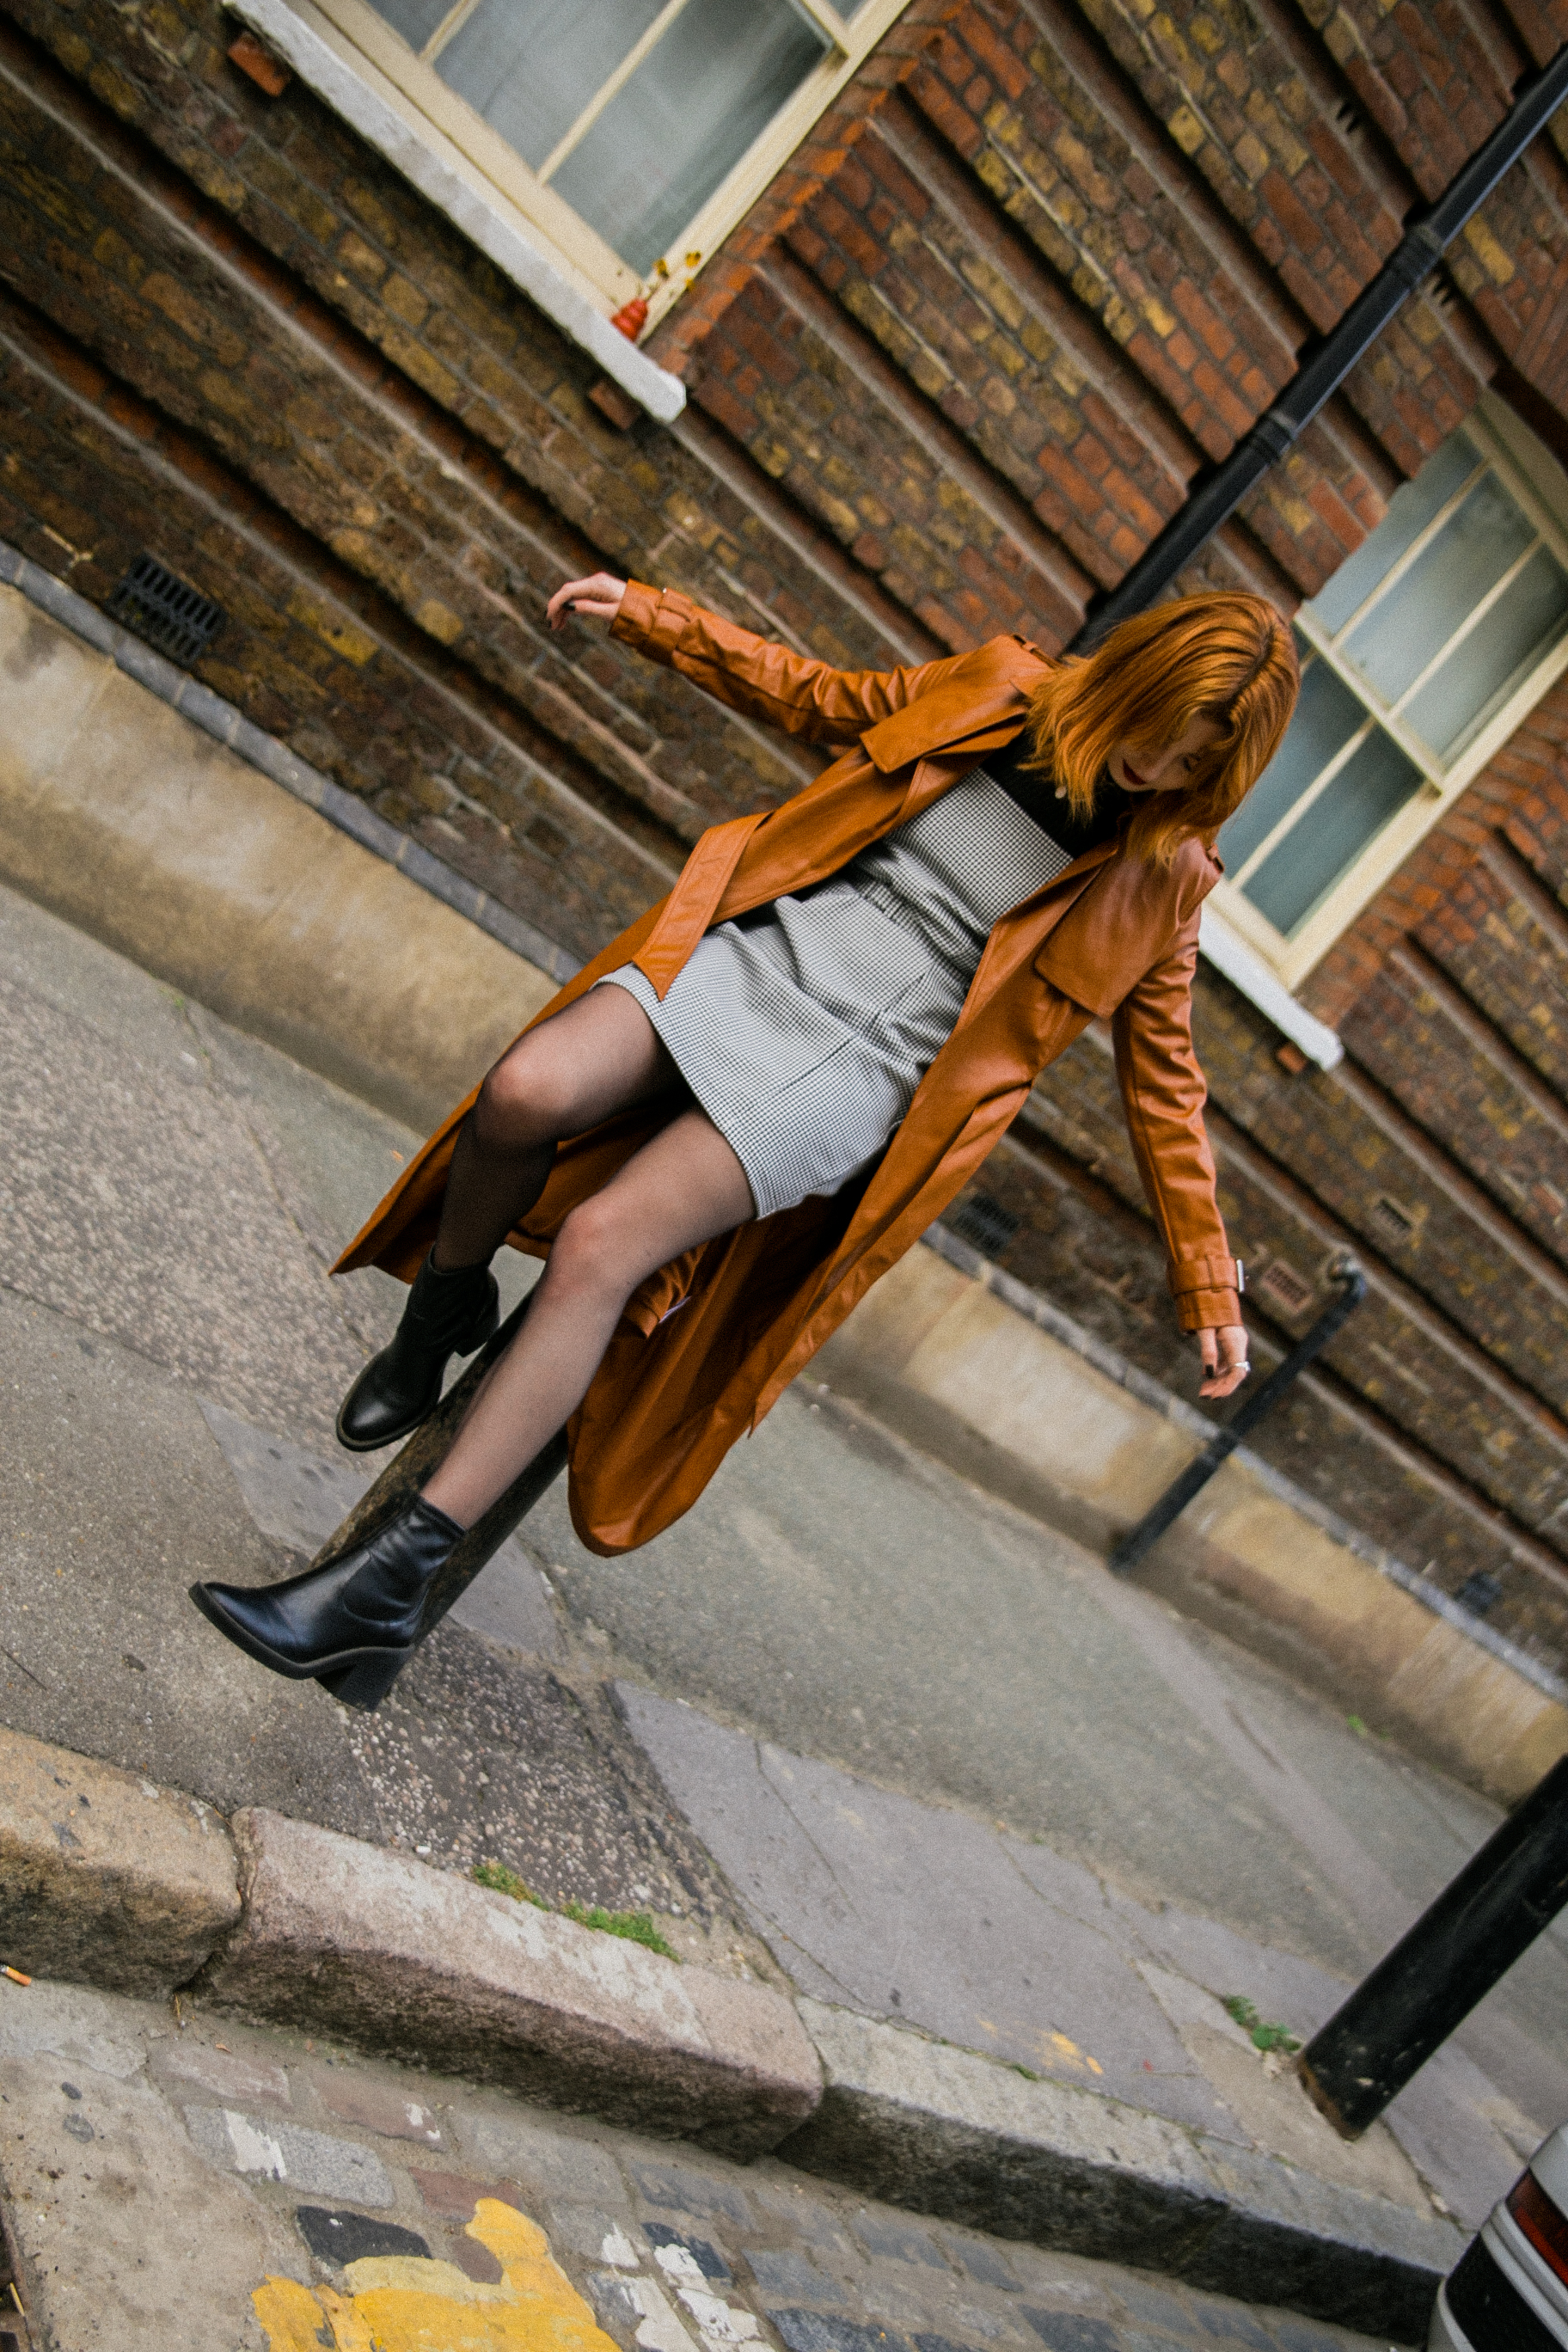 brown-leather-coat